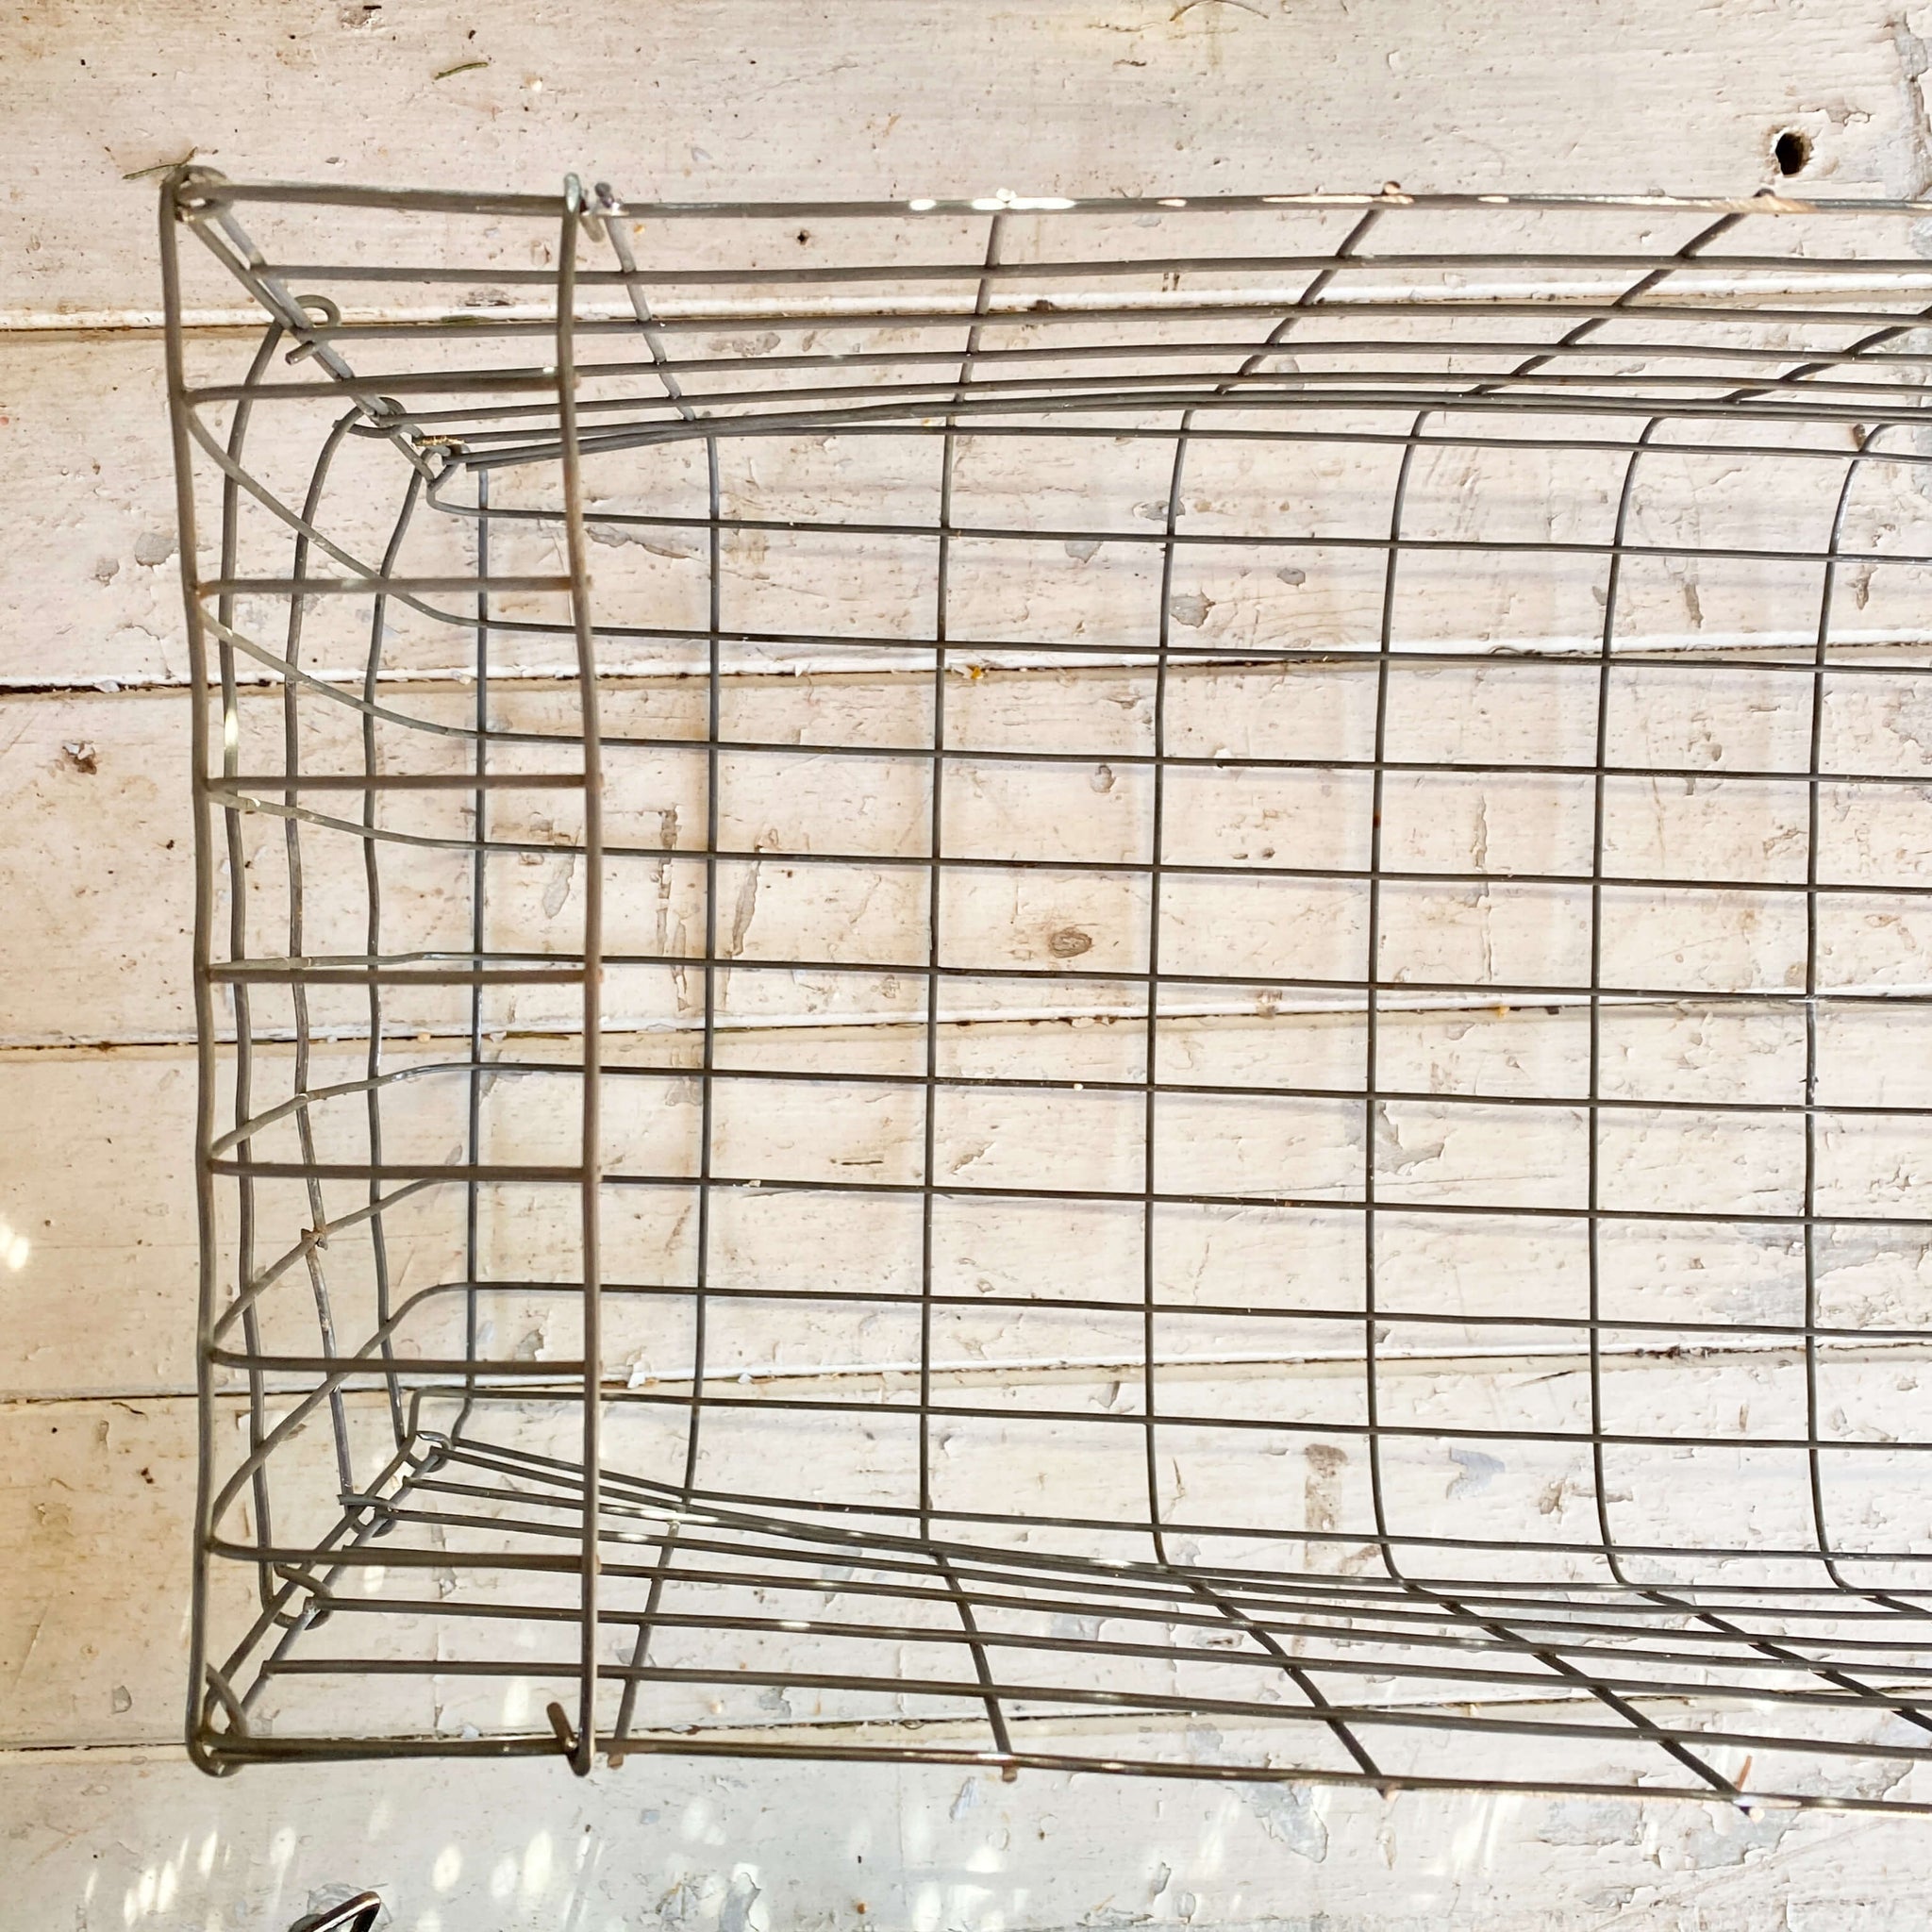 Handmade Wire Basket Storage Totes - Three Sizes Available - 1750 House Exclusive